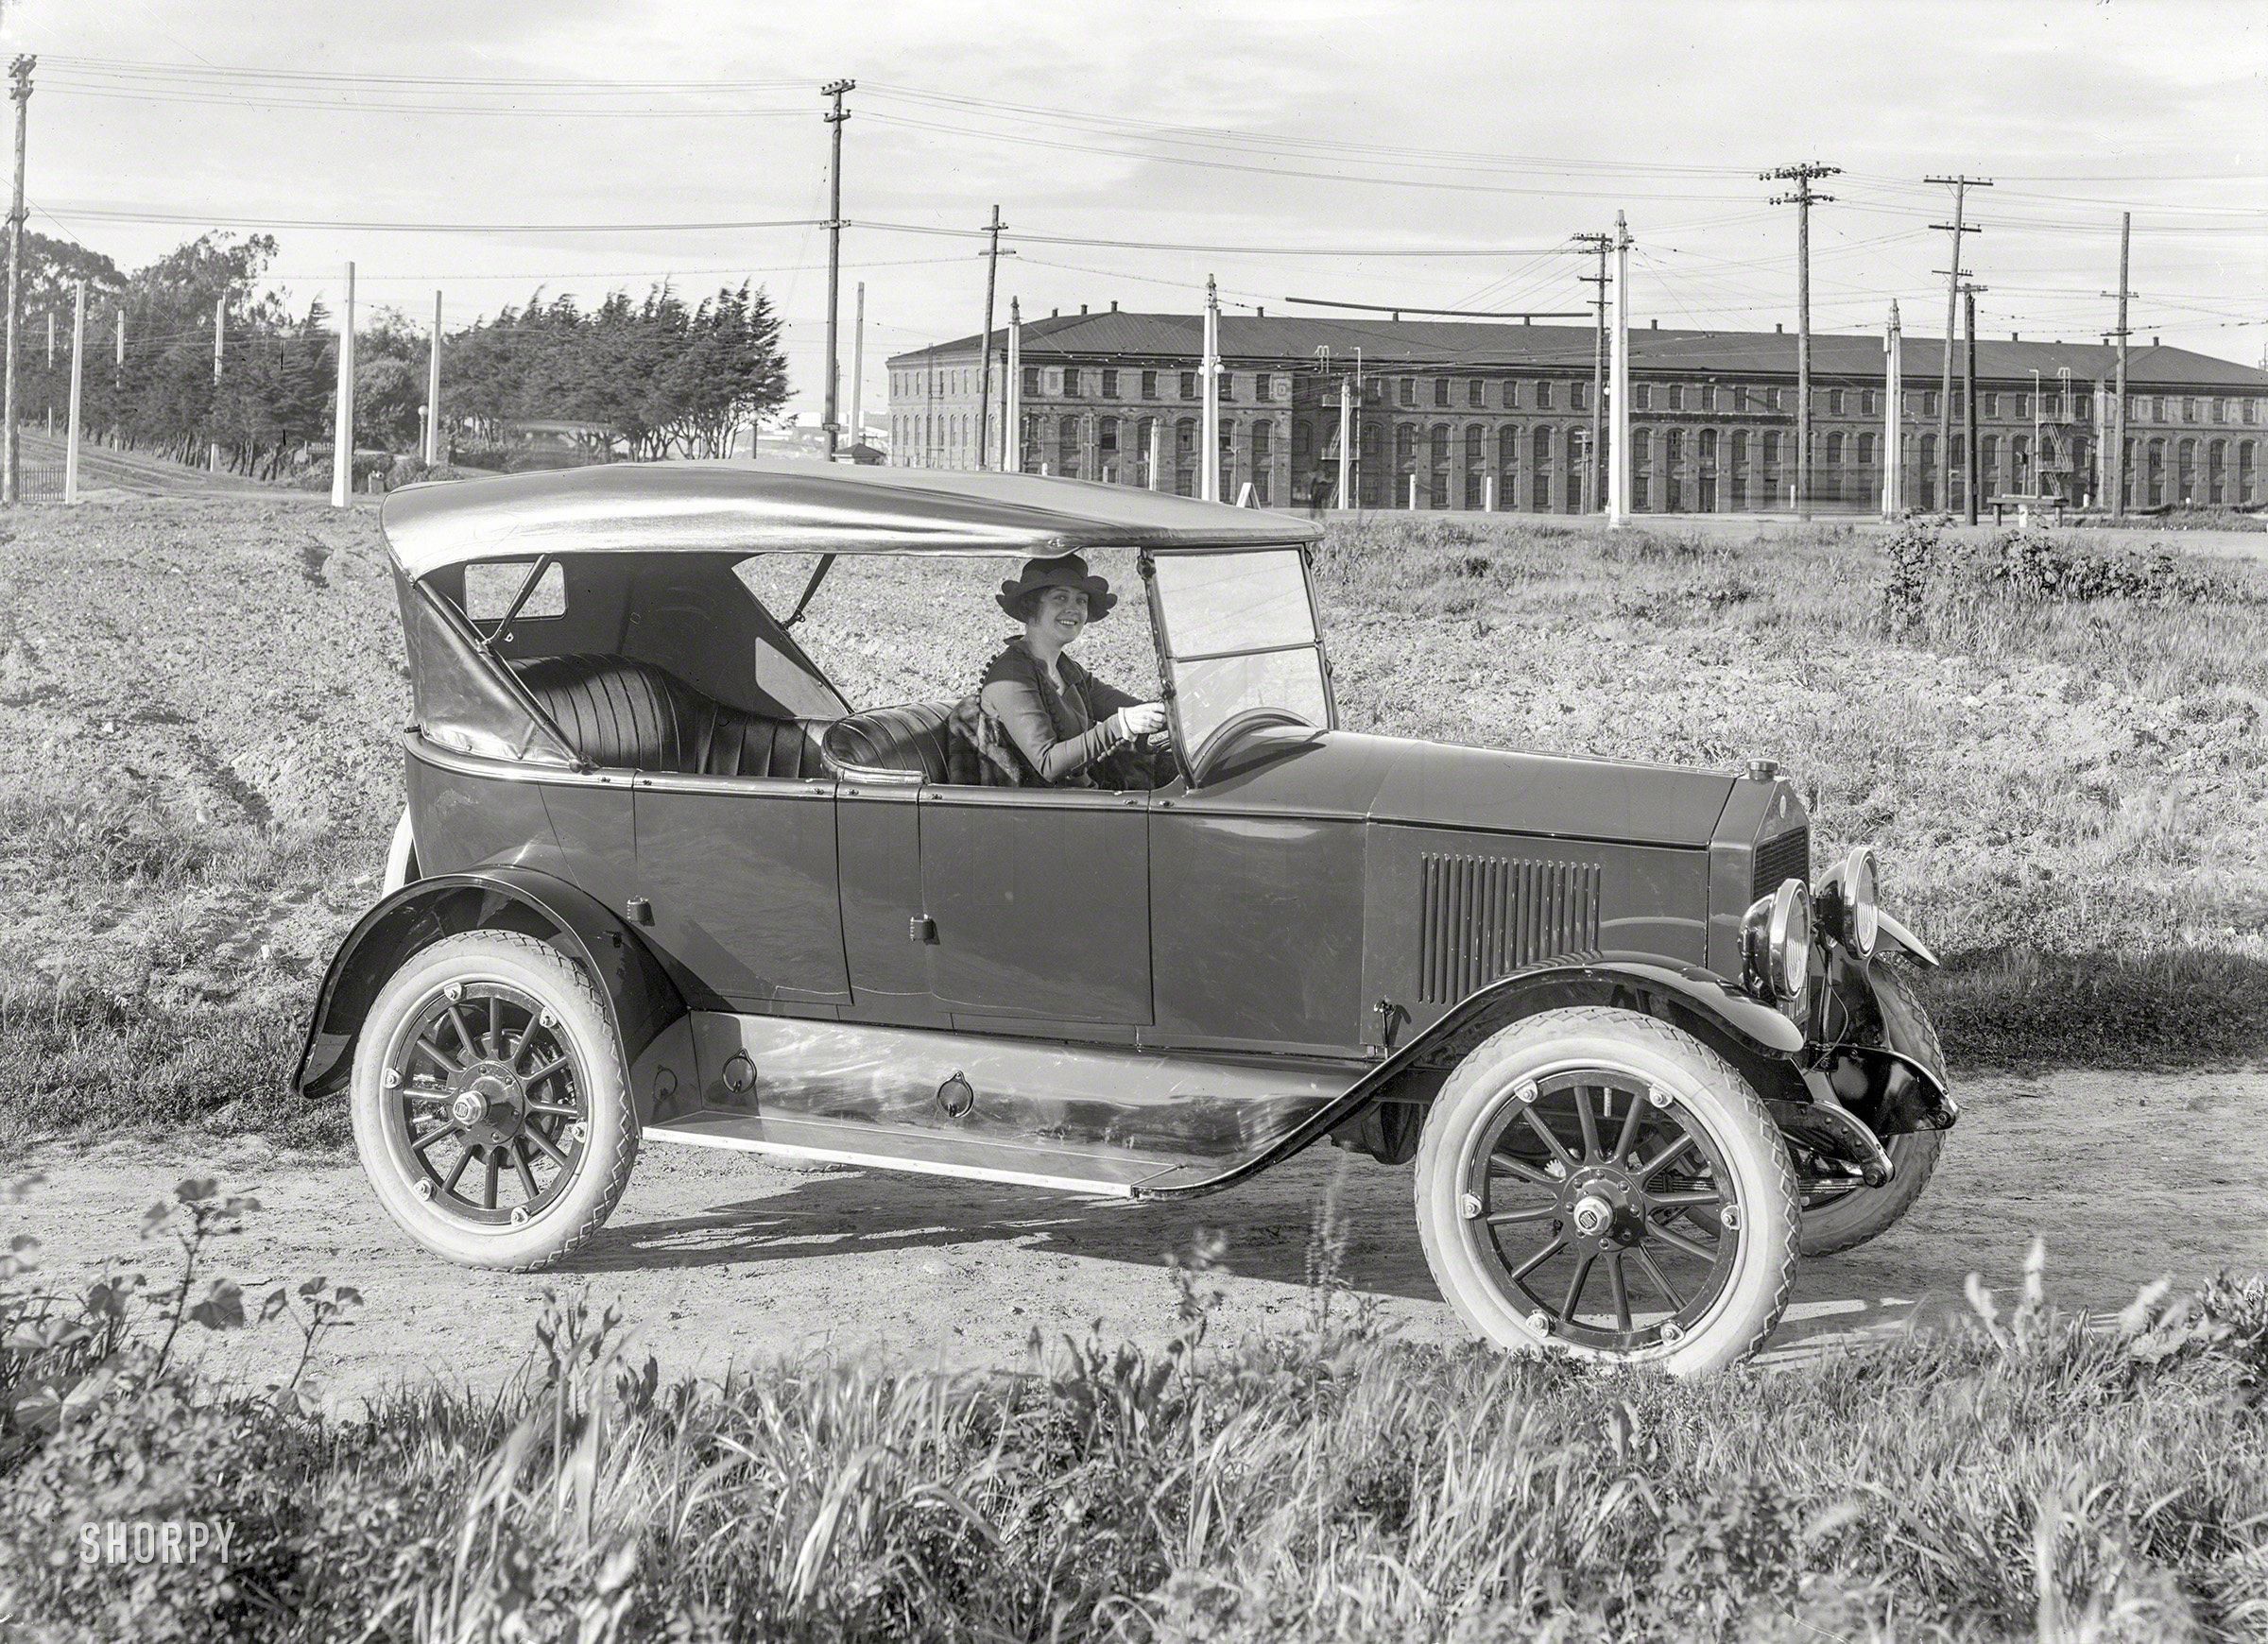 San Francisco. "Dort touring car, 1921." Latest display at the Shorpy Exposition of Obscure Autos. 5x7 glass negative by Christopher Helin. View full size.